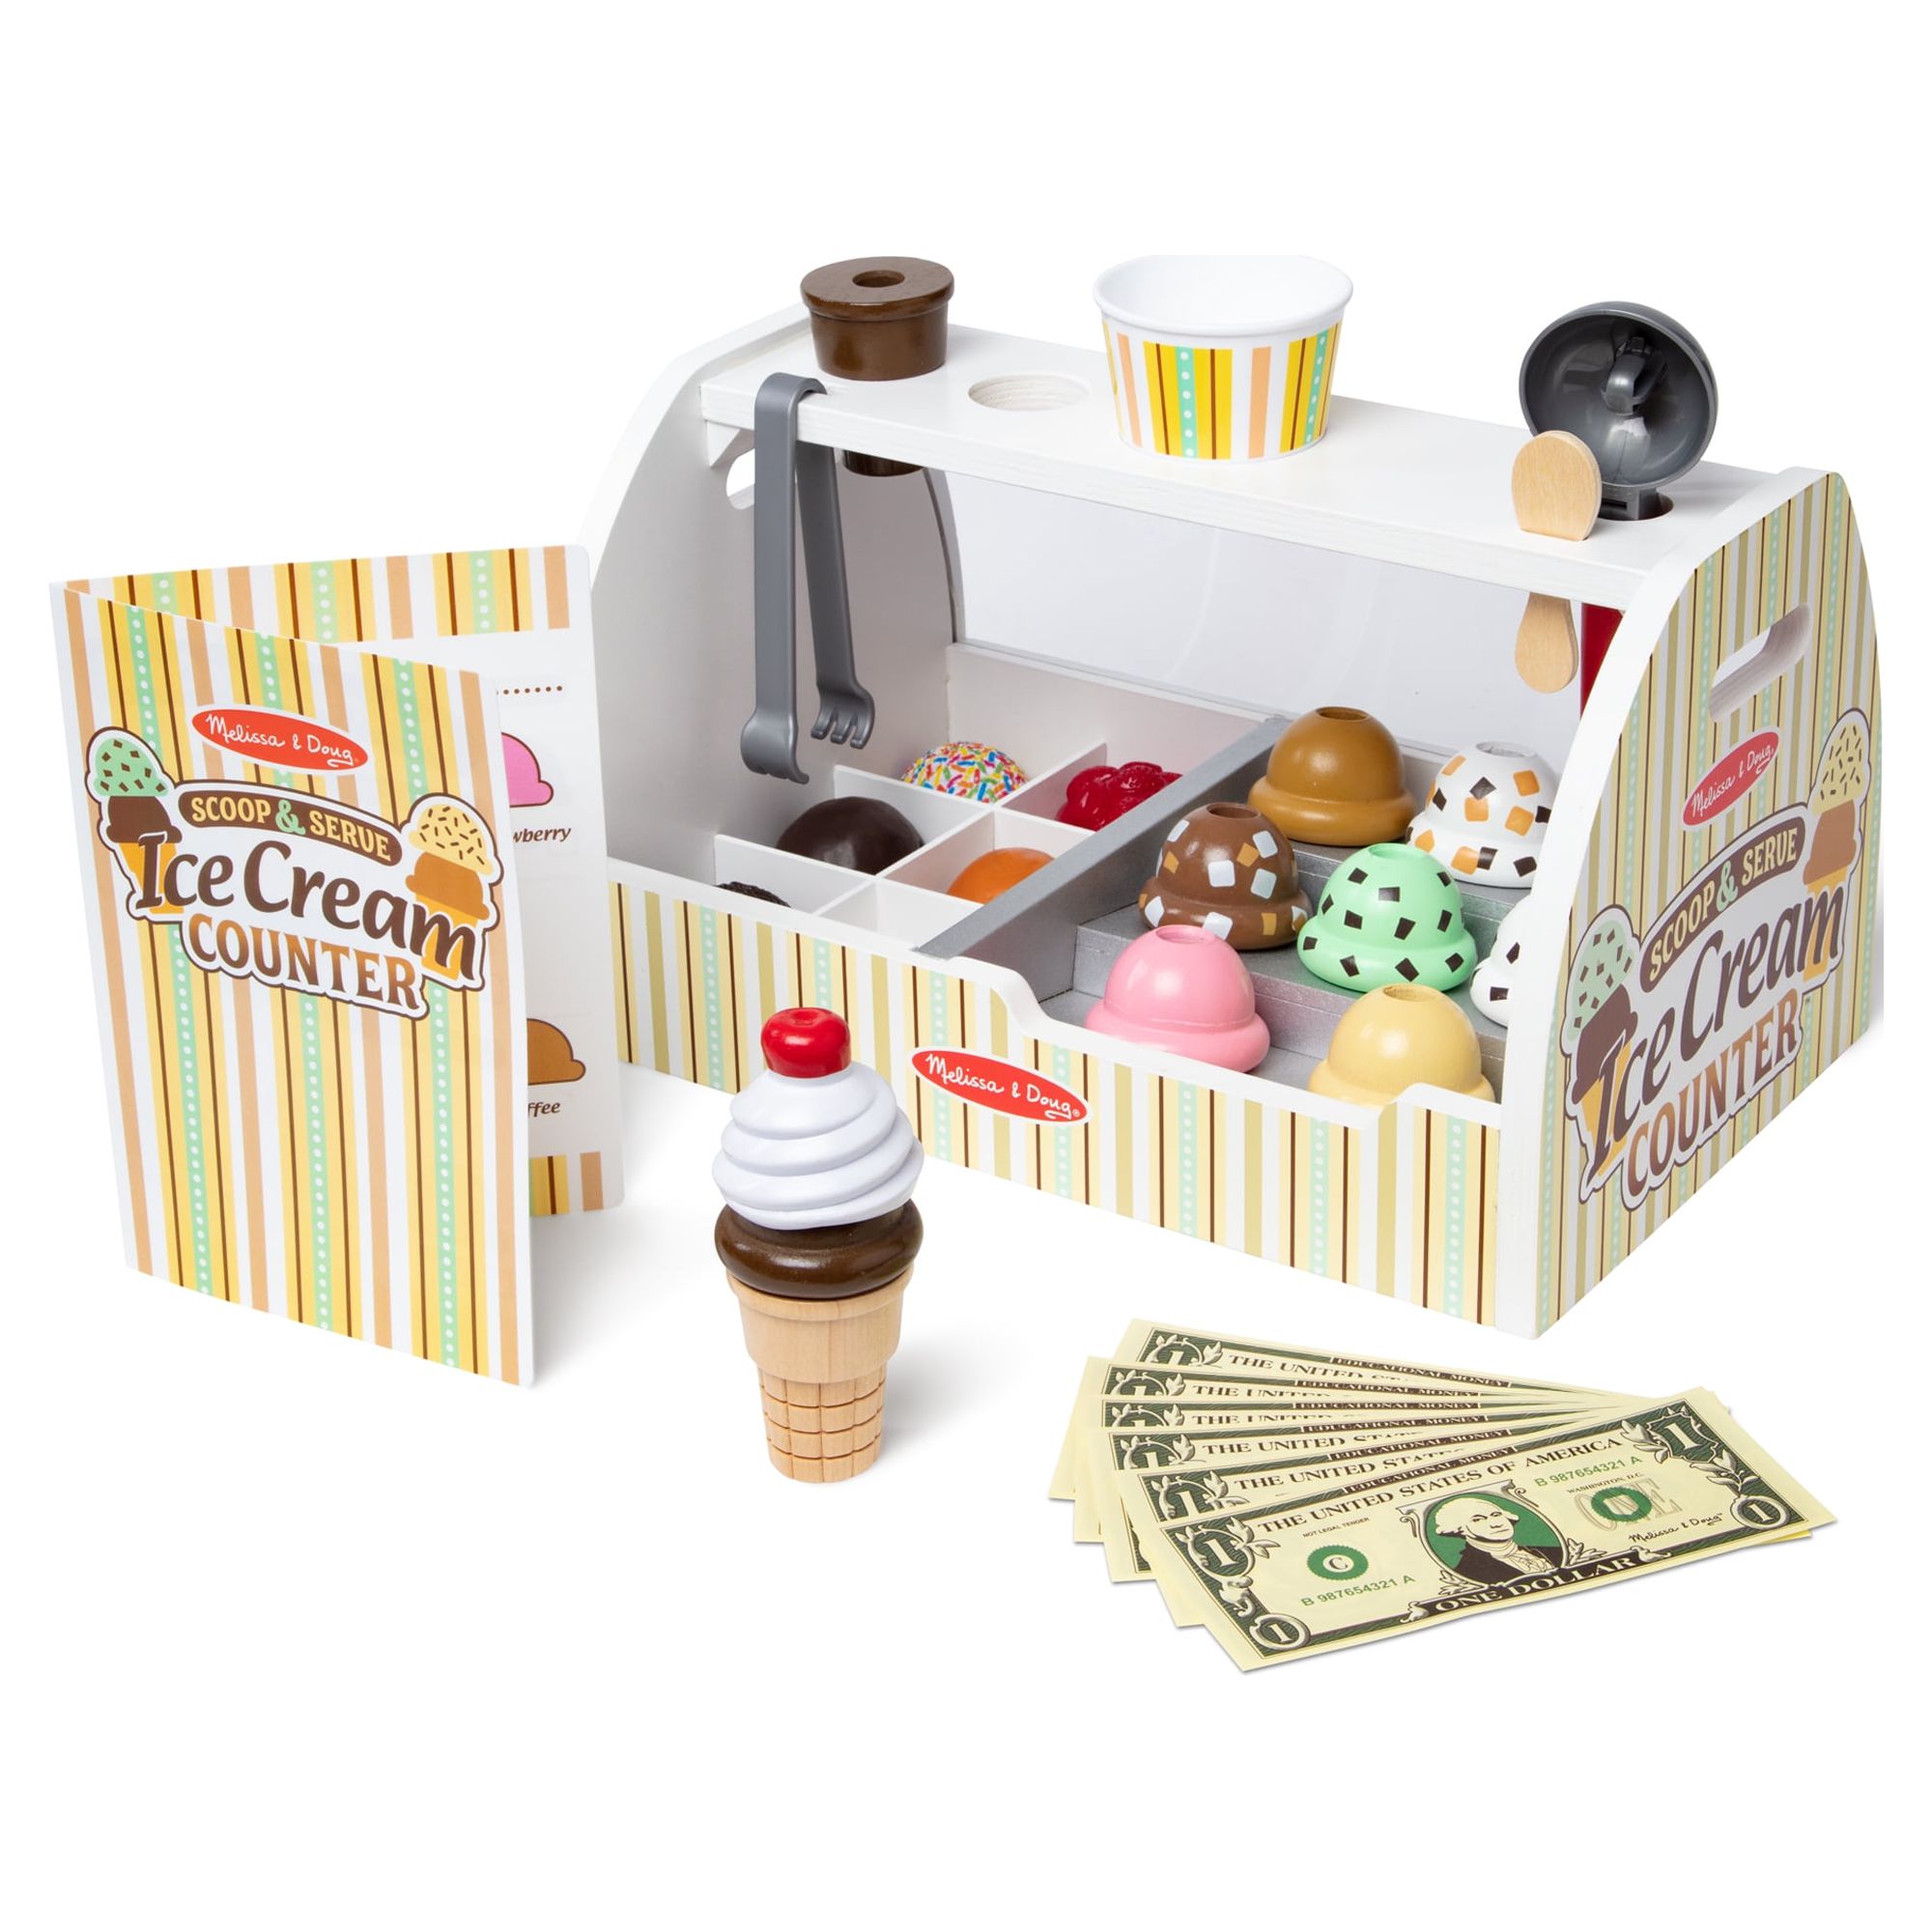 Melissa & Doug Wooden Scoop and Serve Ice Cream Counter (28 pcs) - Play Food and Accessories - image 1 of 11